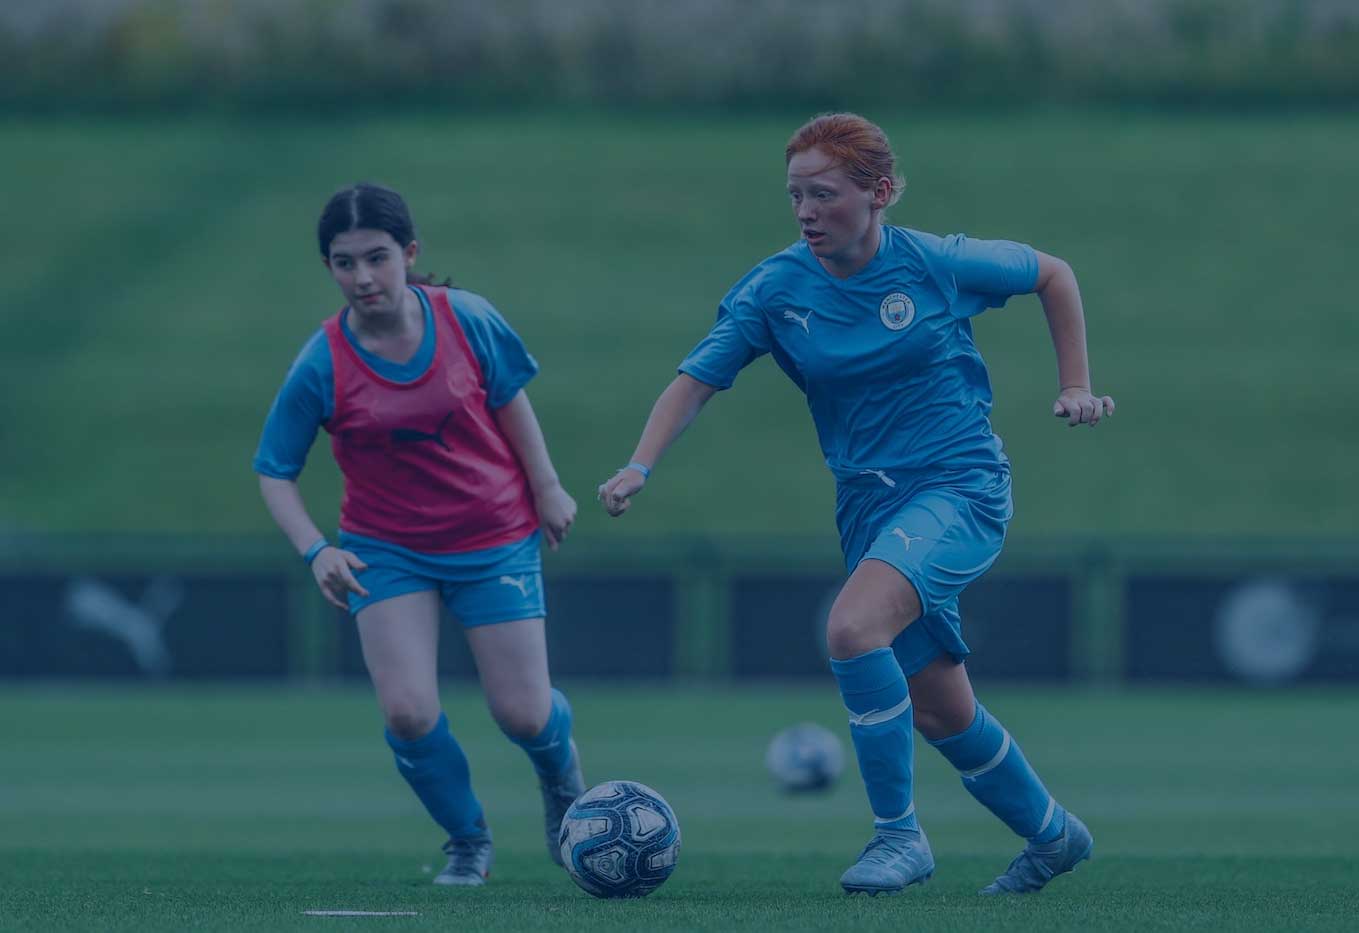 A young girl with blonde hair, wearing a Manchester City Football School kit, playing football.